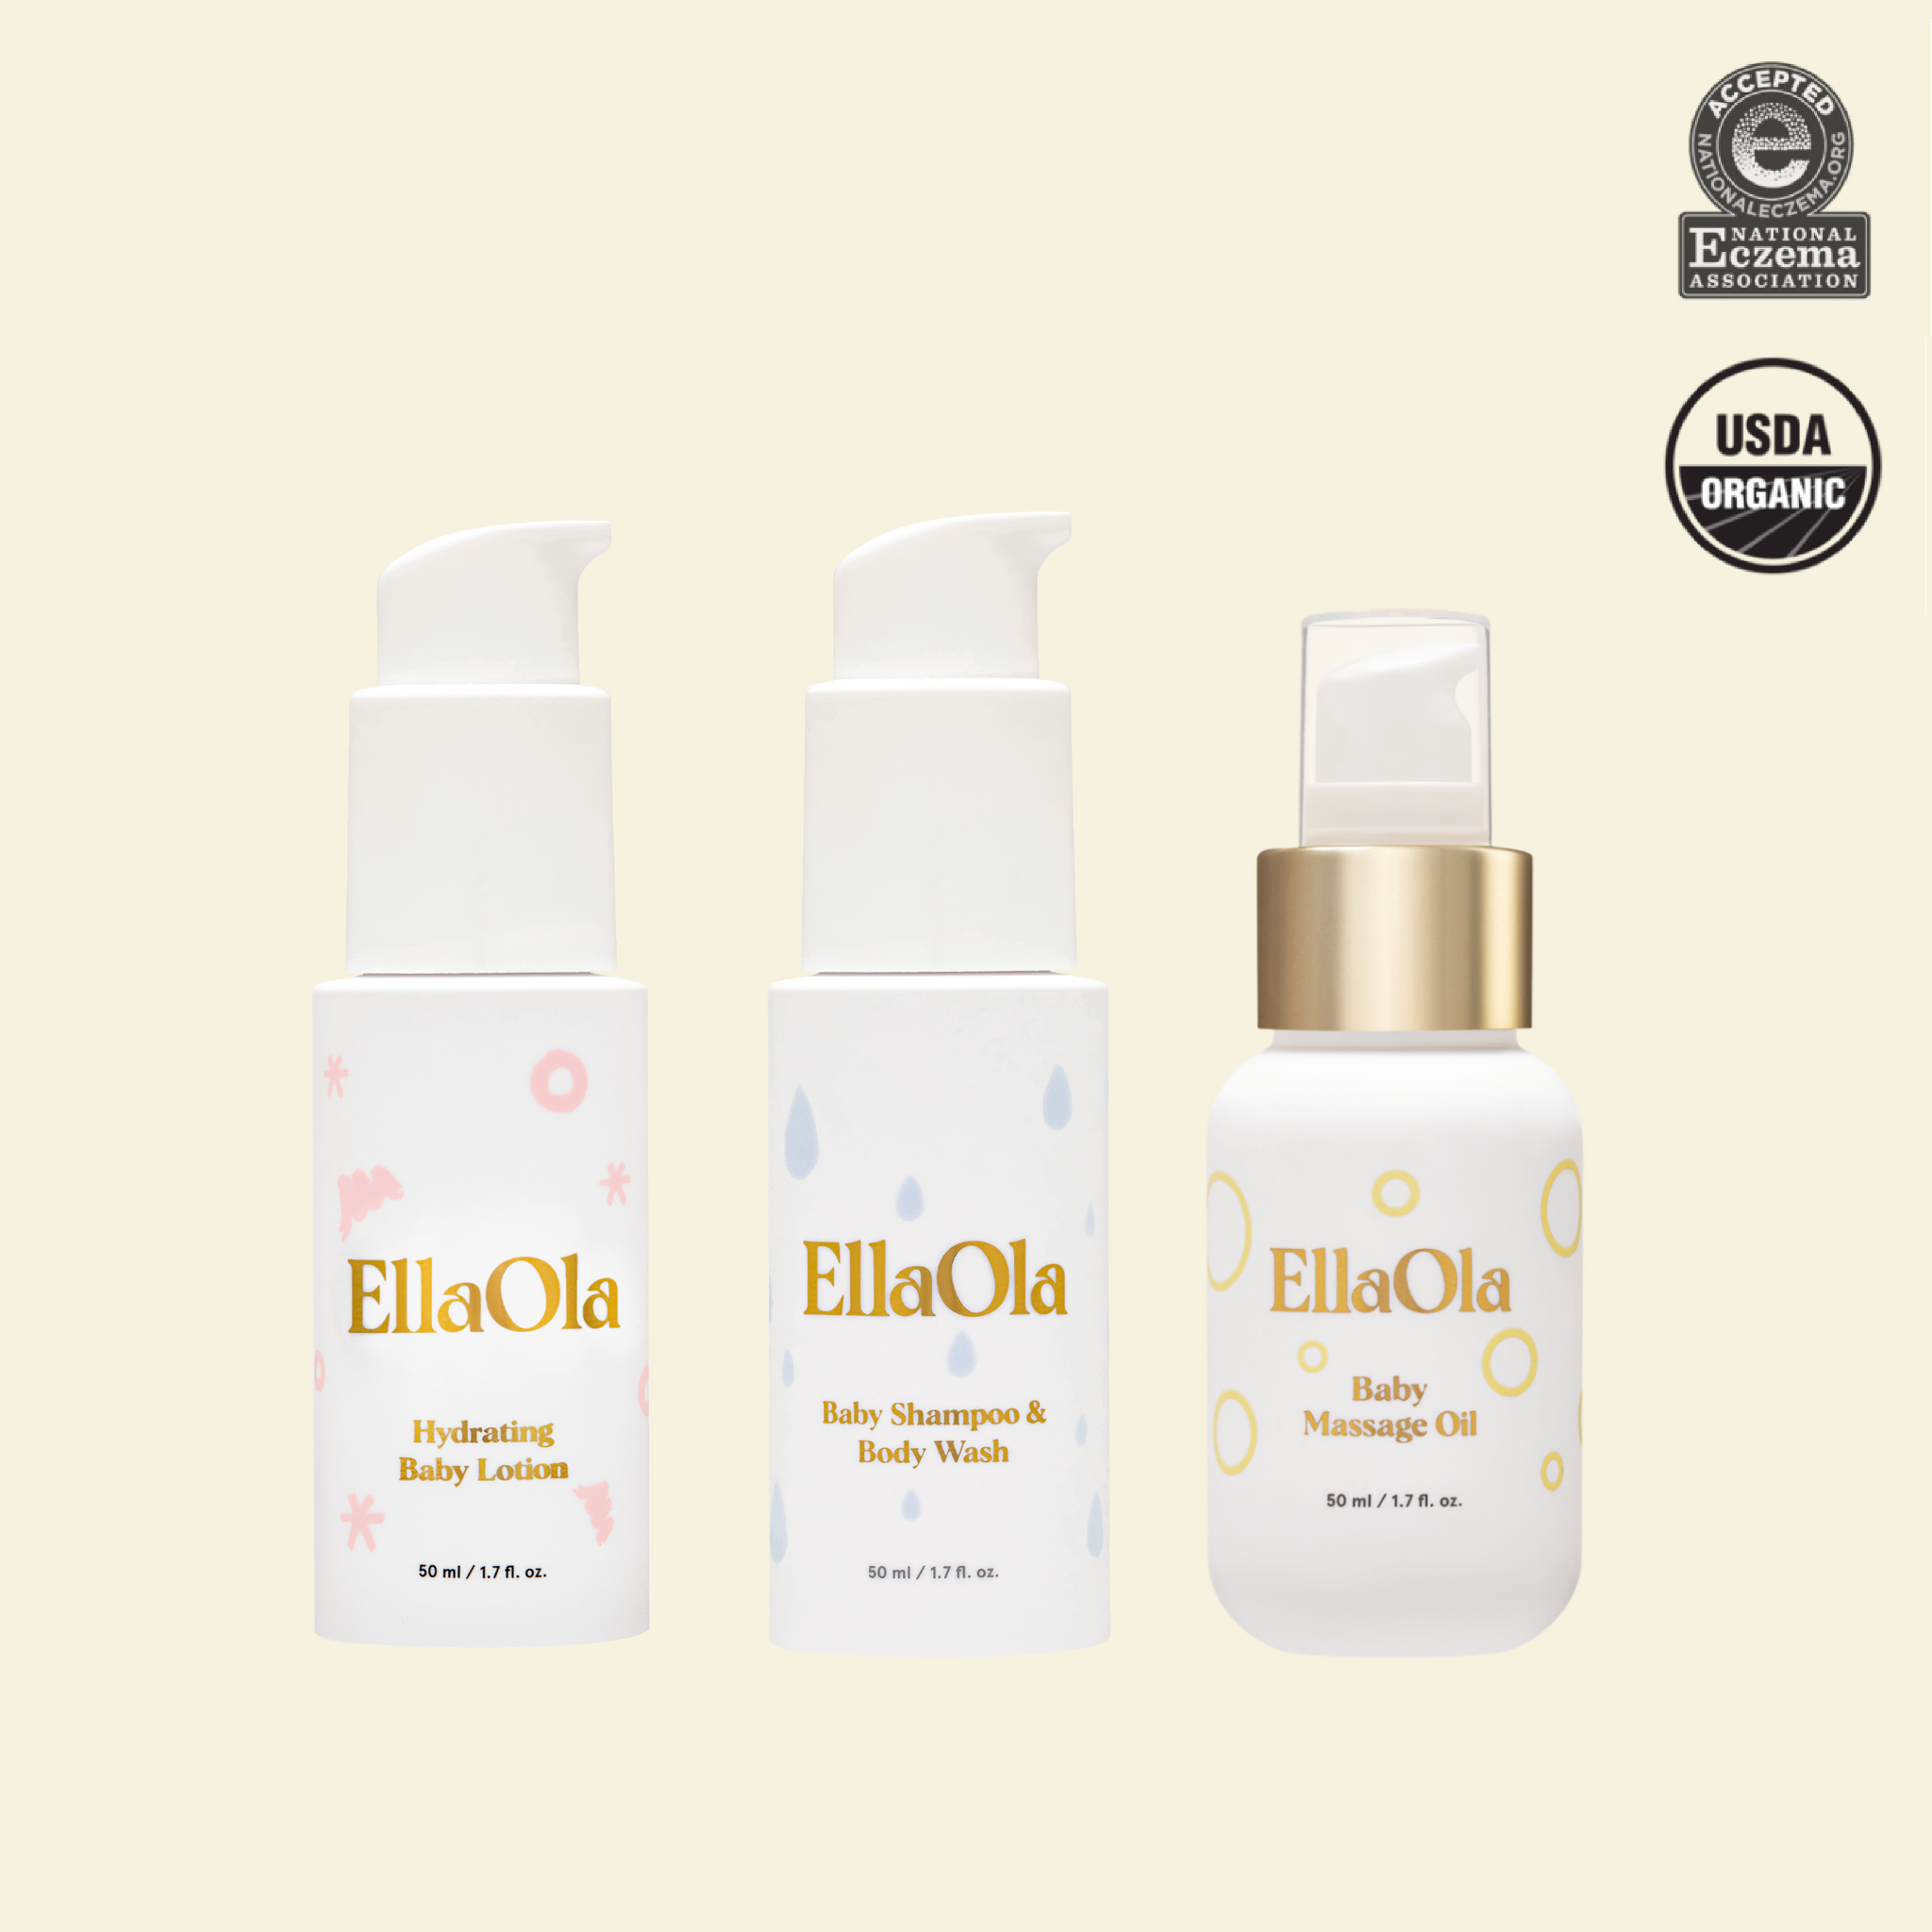 The Travel Size Set by EllaOla